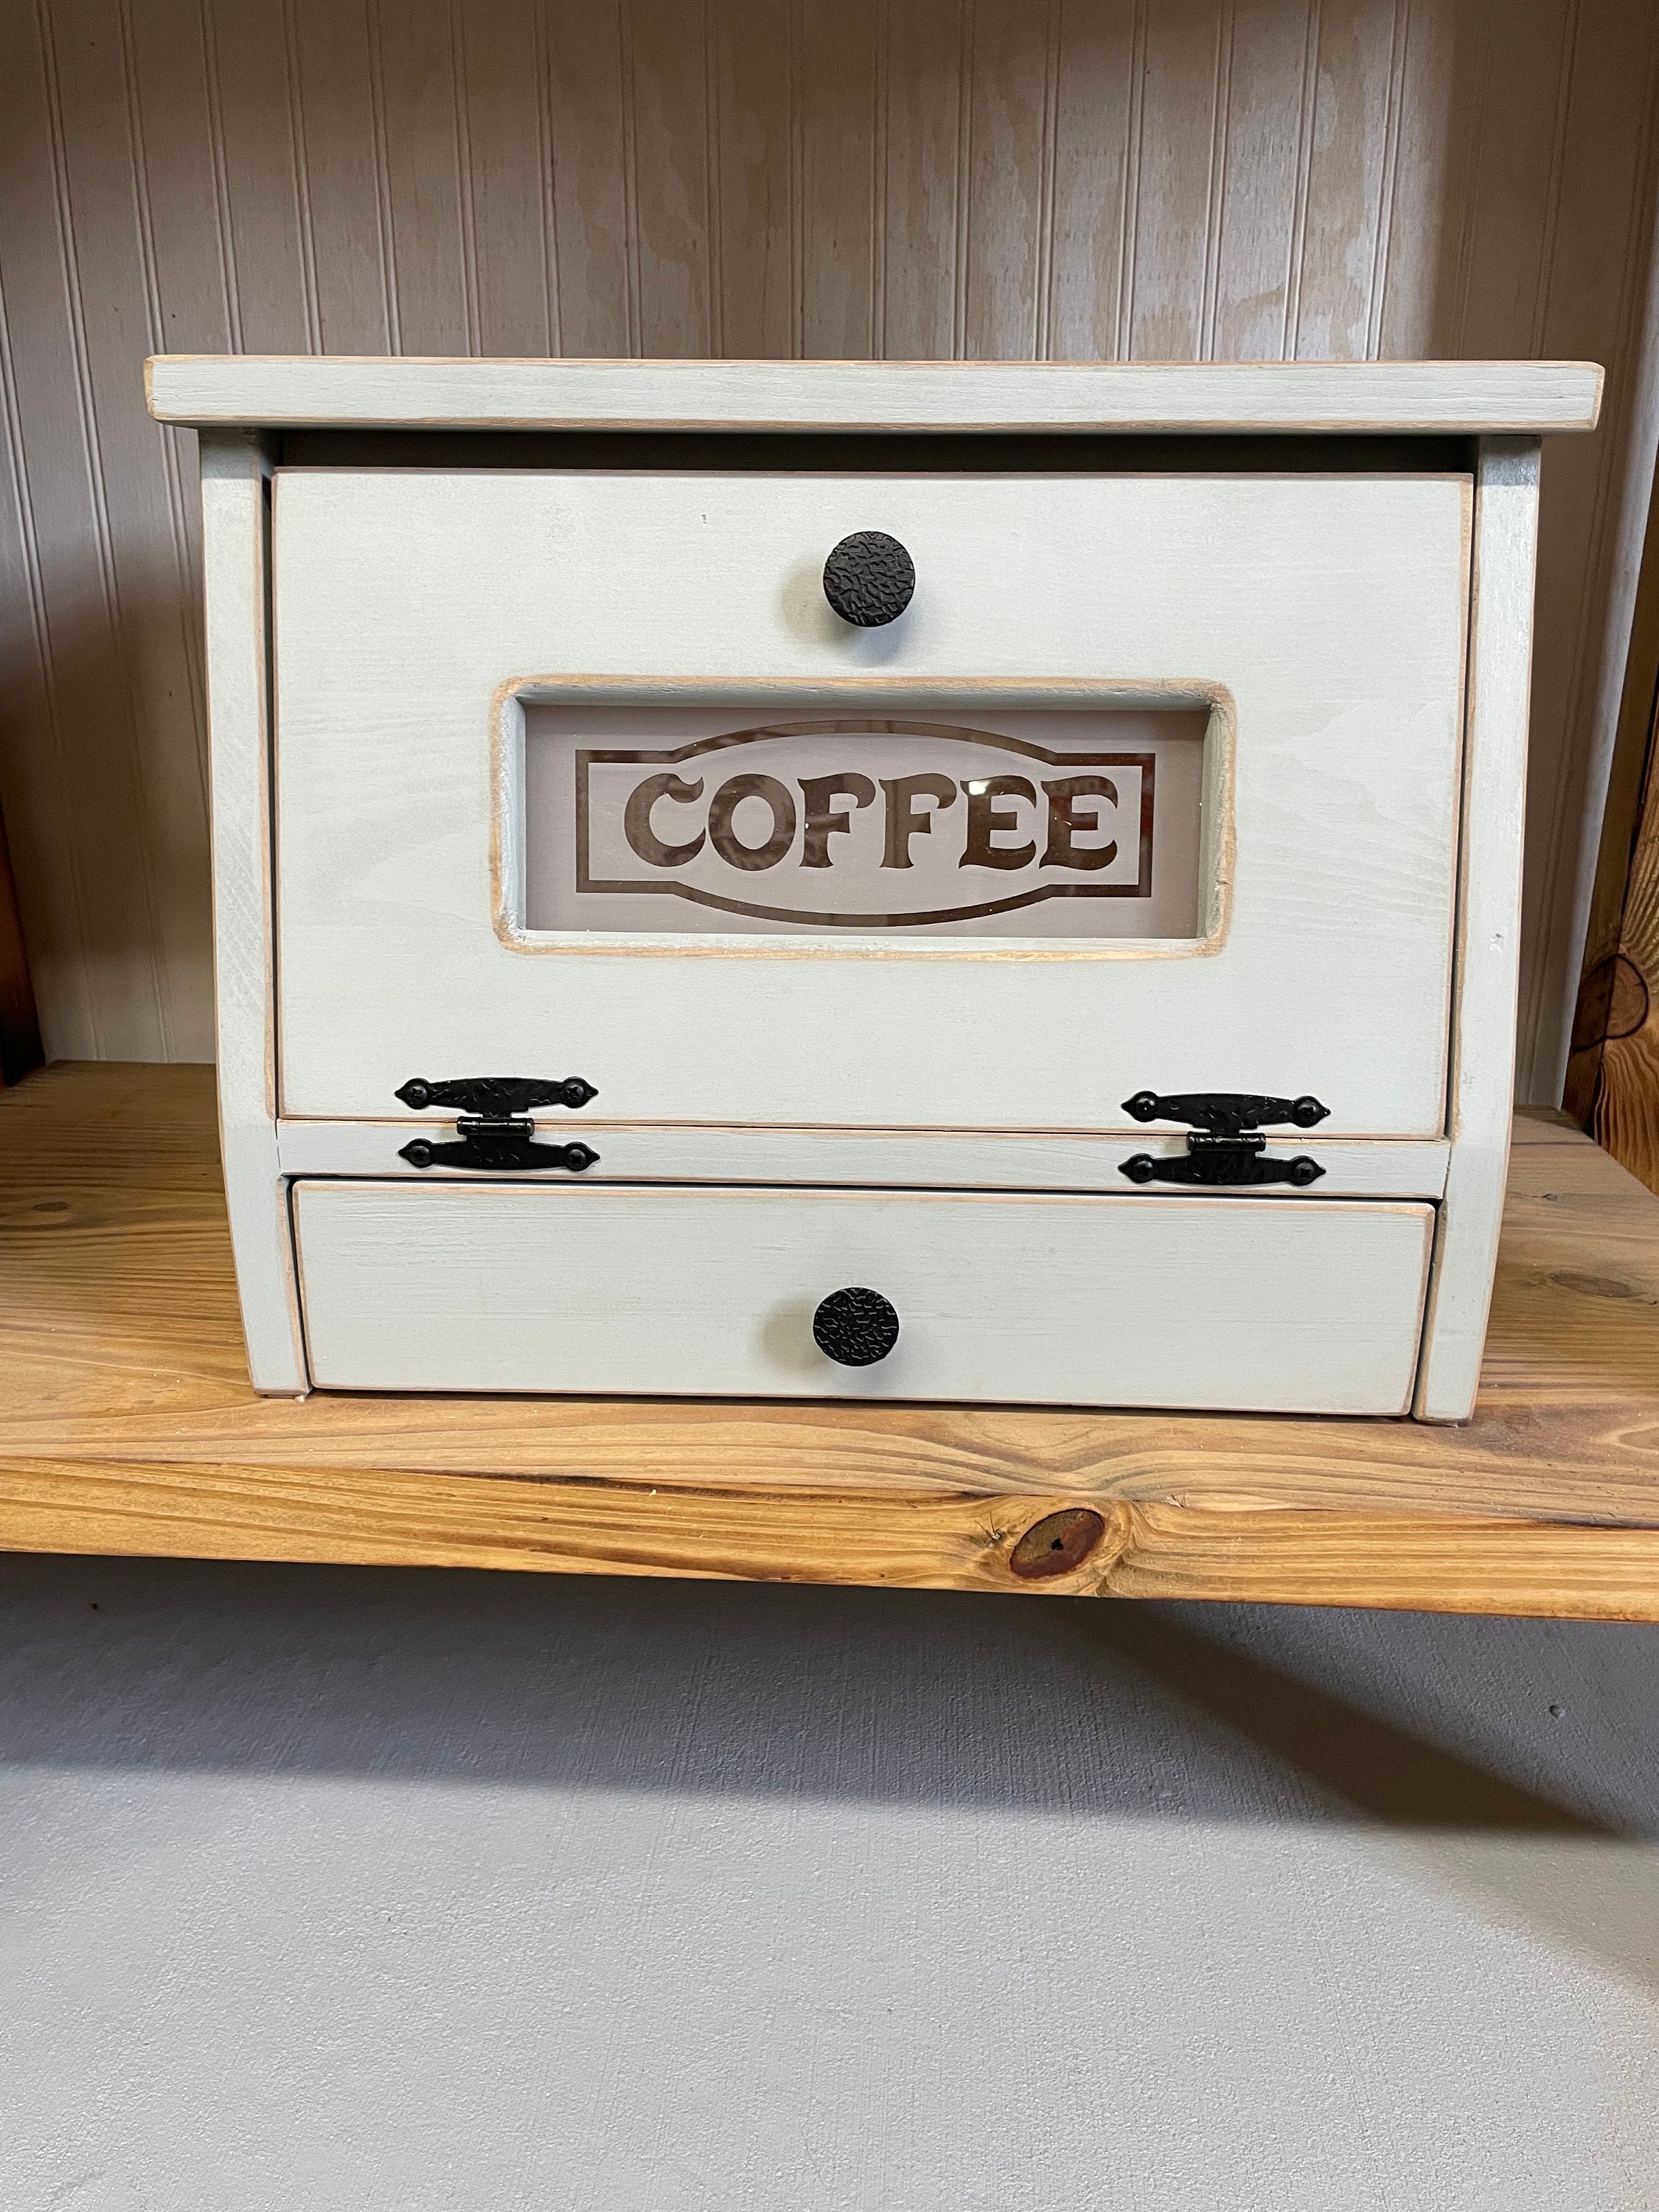 Ikkle Wooden Coffee Station Organizer with Drawer, Rustic Coffee Bar Accessories Organizer for Counter, Coffee Pods Storage Drawer and Organizer